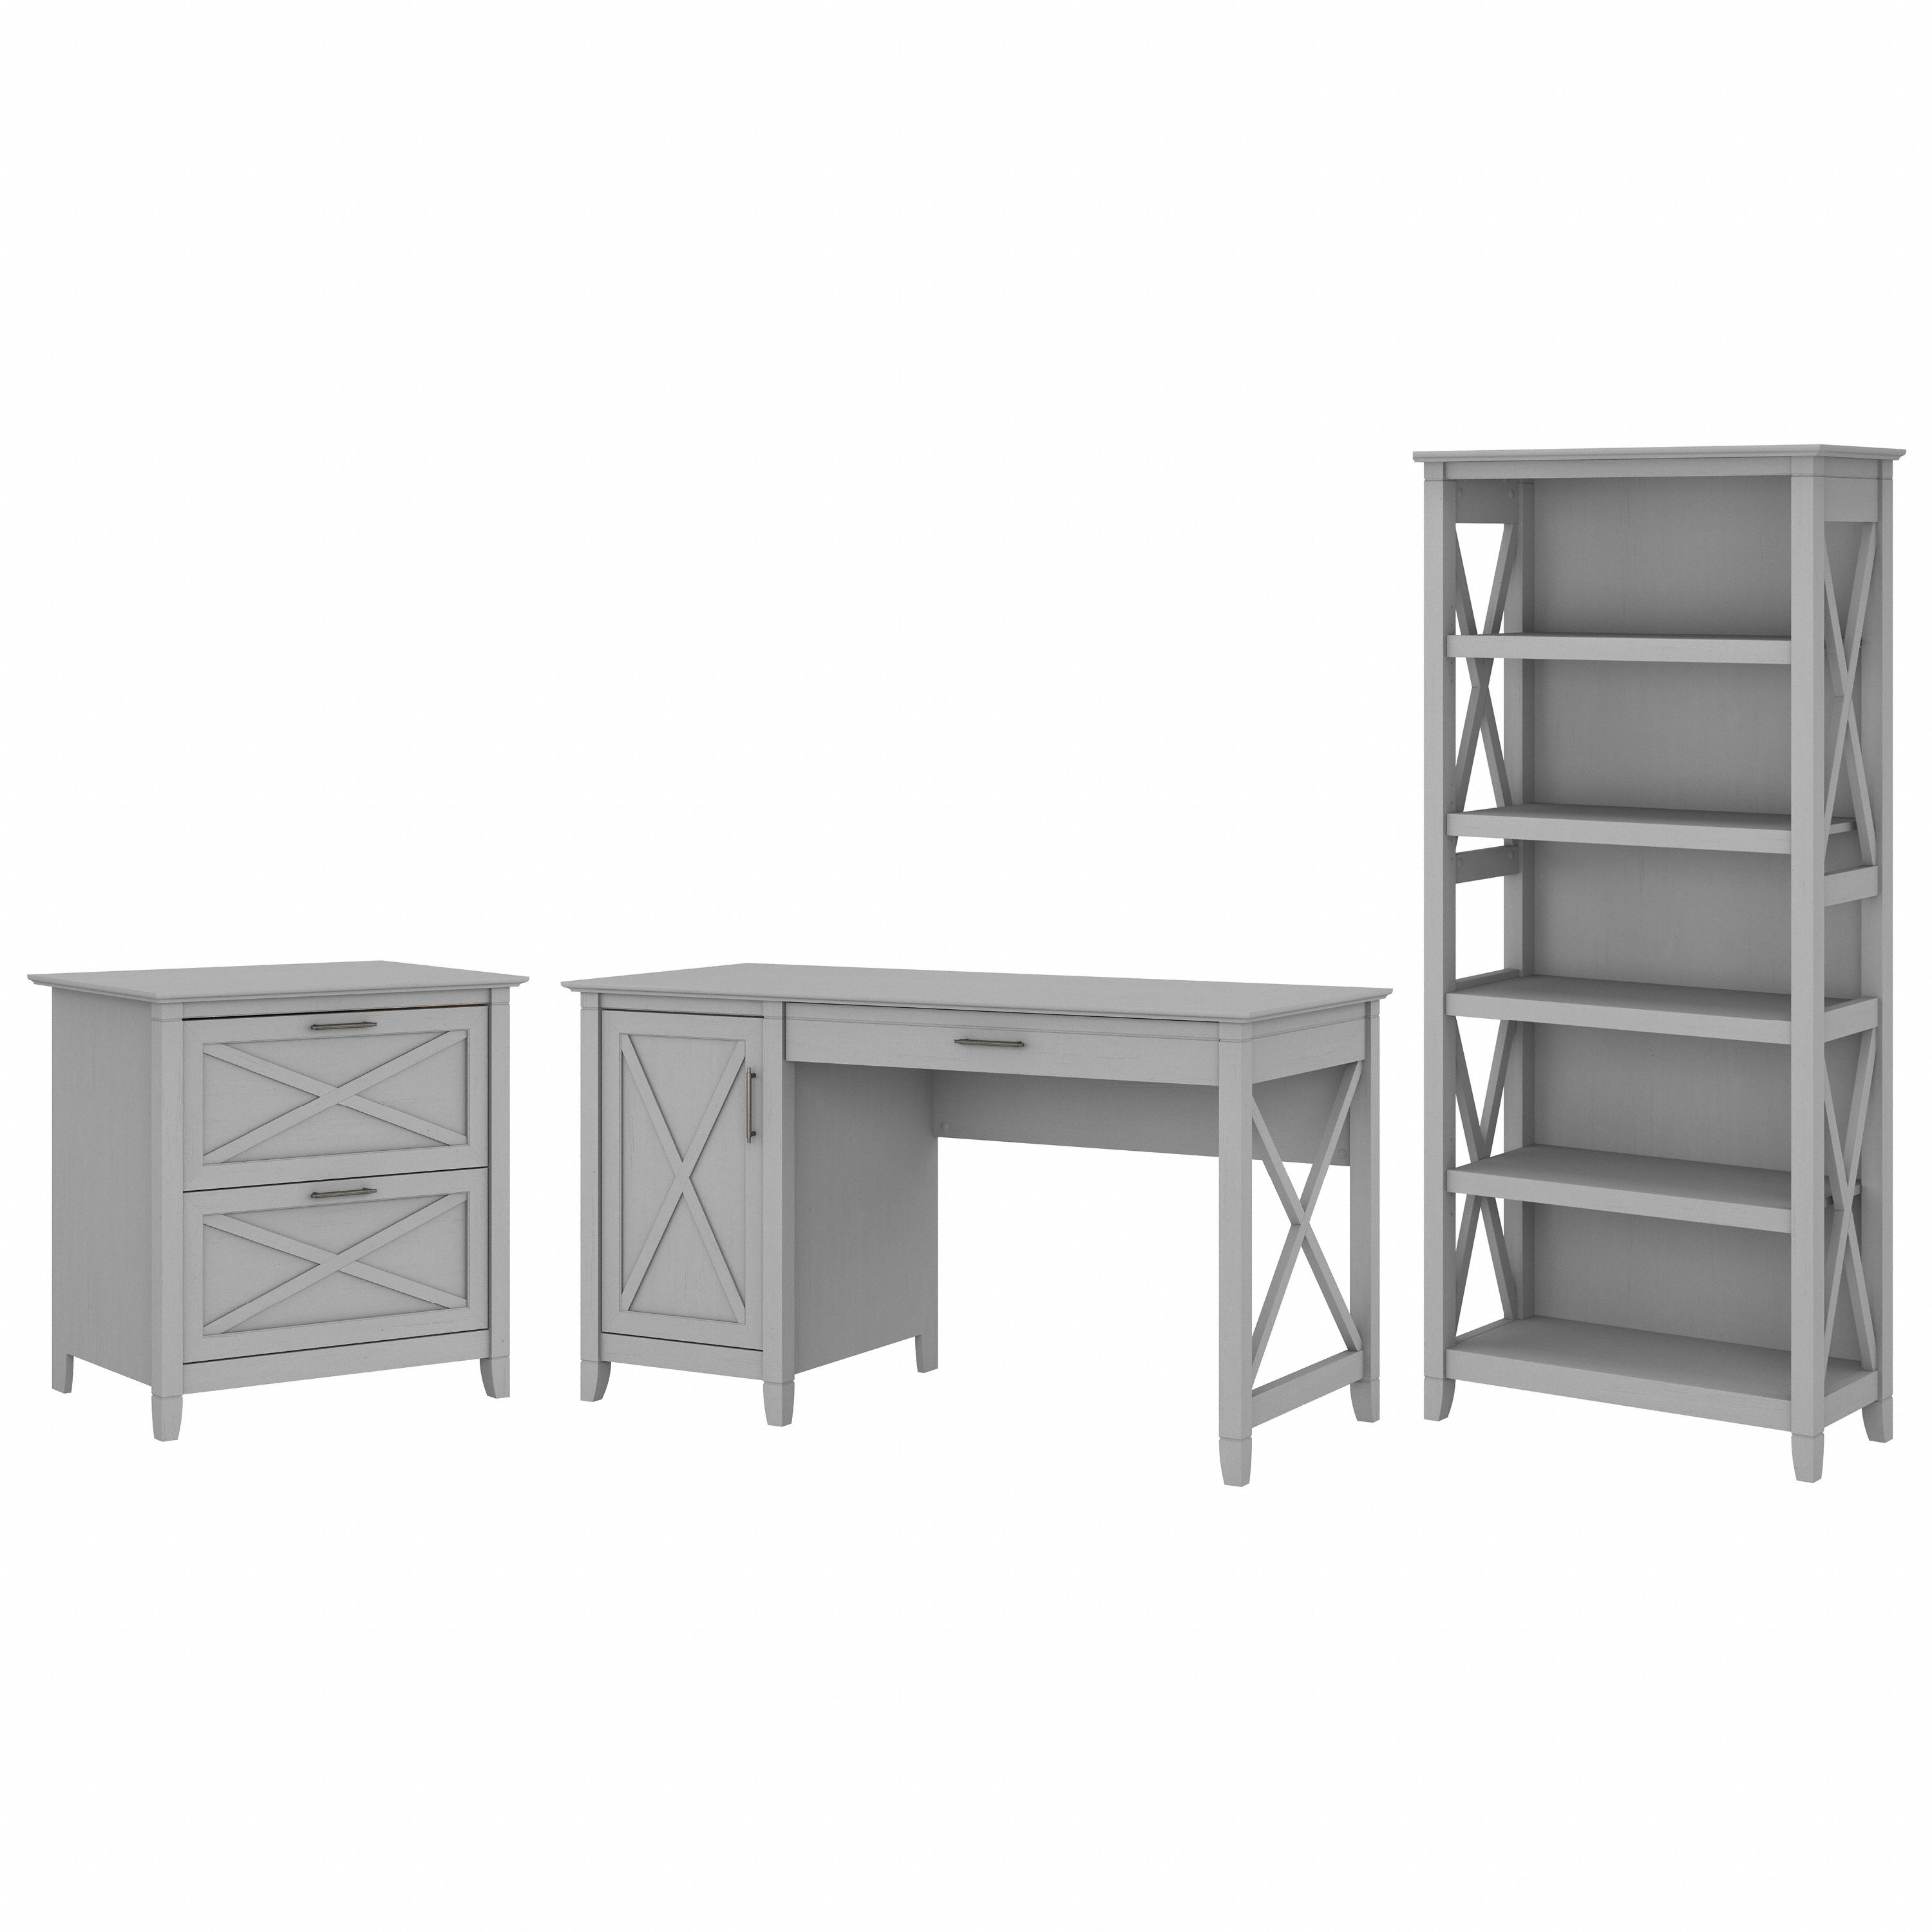 Shop Bush Furniture Key West 54W Computer Desk with 2 Drawer Lateral File Cabinet and 5 Shelf Bookcase 02 KWS009CG #color_cape cod gray